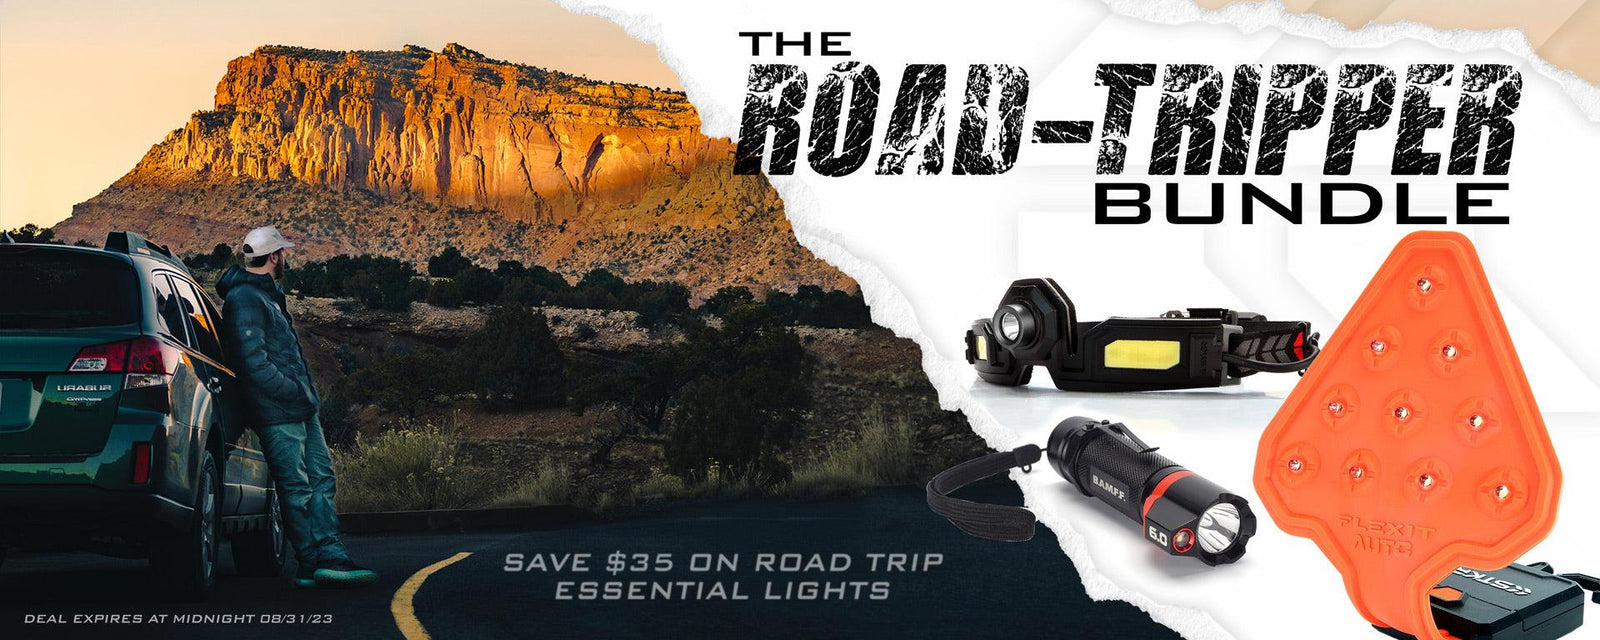 The Road-Tripper Bundle Banner featuring the FLEXIT Headlamp 6.5 Pro, the BAMFF 6.0 Tactical Flashlight, and the FLEXIT Auto flexible flashlight.